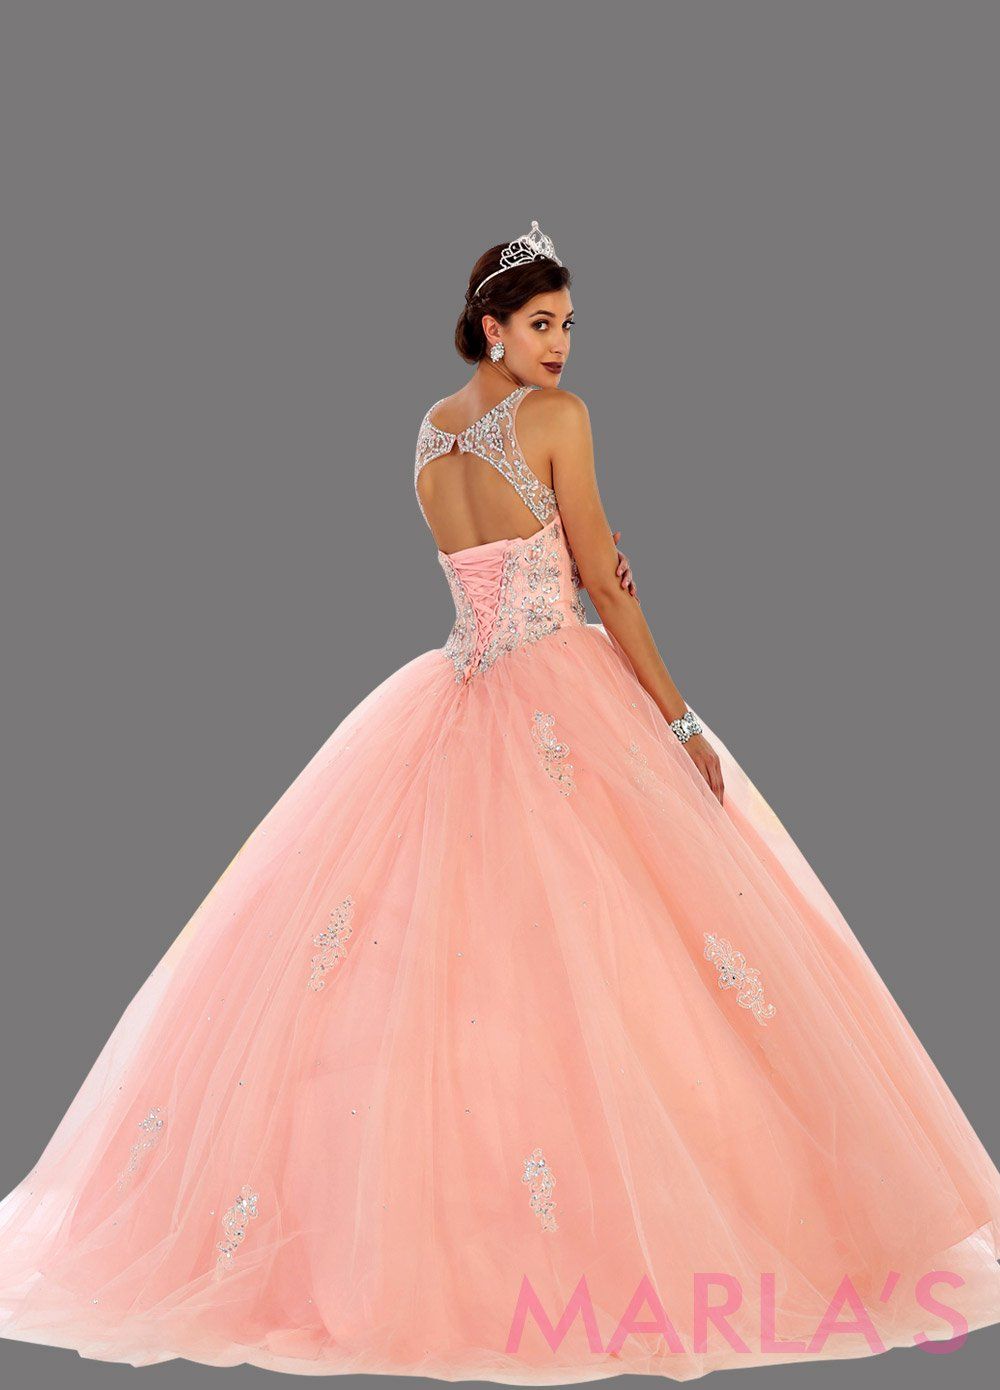 Back of Long blush pink strapless princess quinceanera ball gown with rhinestone beading. Perfect light pink dress for Engagement dress, Quinceanera, Sweet 16, Sweet 15 and pink Wedding Reception Dress. Available in plus